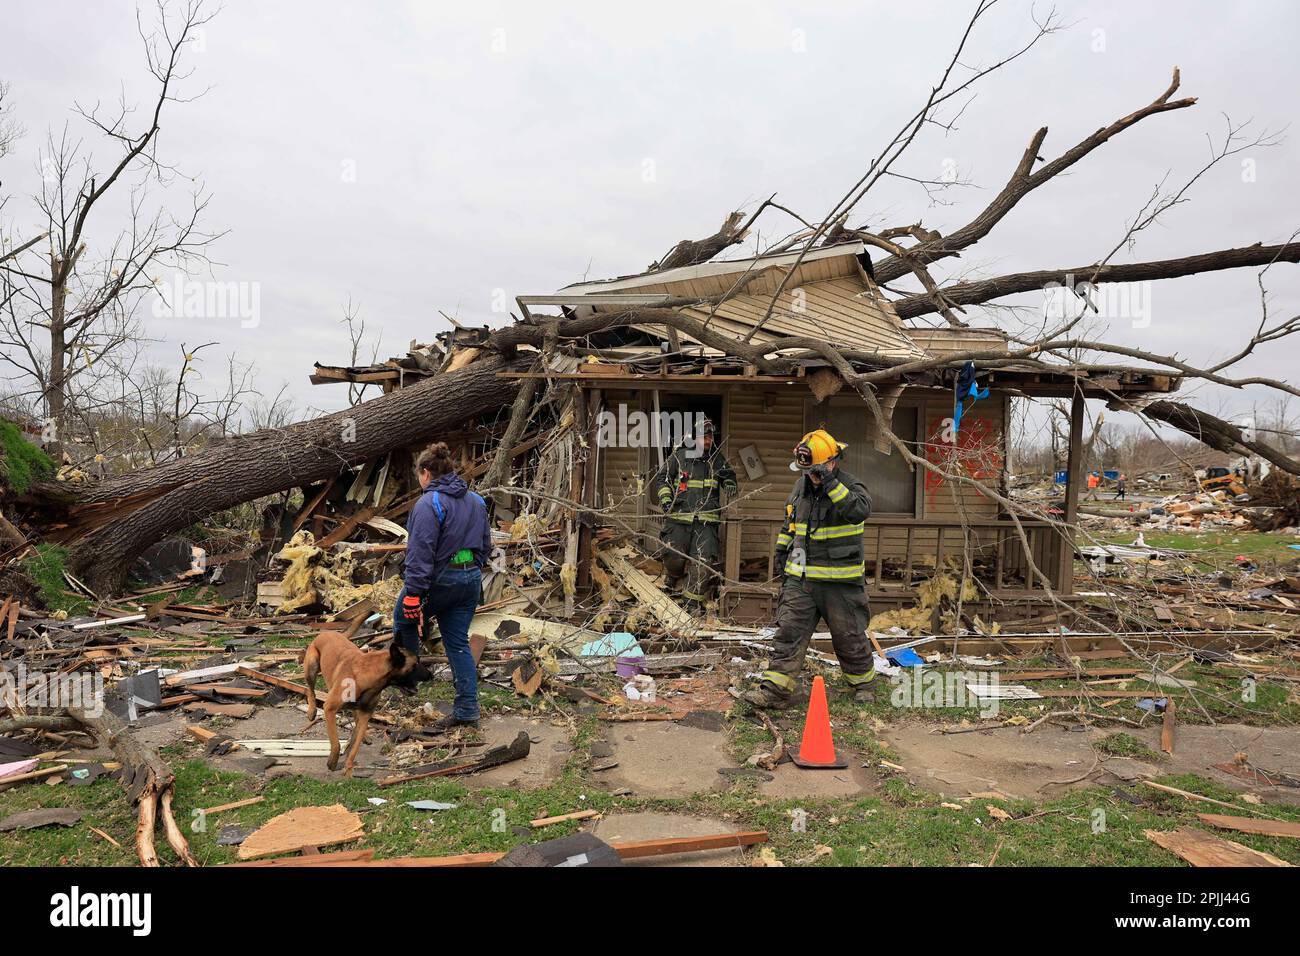 SULLIVAN, INDIANA - APRIL 1: Firefighters and a K9 searcher look help with search and rescue operations after a tornado on April 1, 2023 in Sullivan, Indiana. Three people were declared dead, and 8 others were injured, as the search and rescue operation continued Saturday afternoon. The severe storm that created the tornado struck Friday, March 31, 2023 and damaged about 150 homes and structures in Sullivan. (Photo by Jeremy Hogan/The Bloomingtonian) Stock Photo